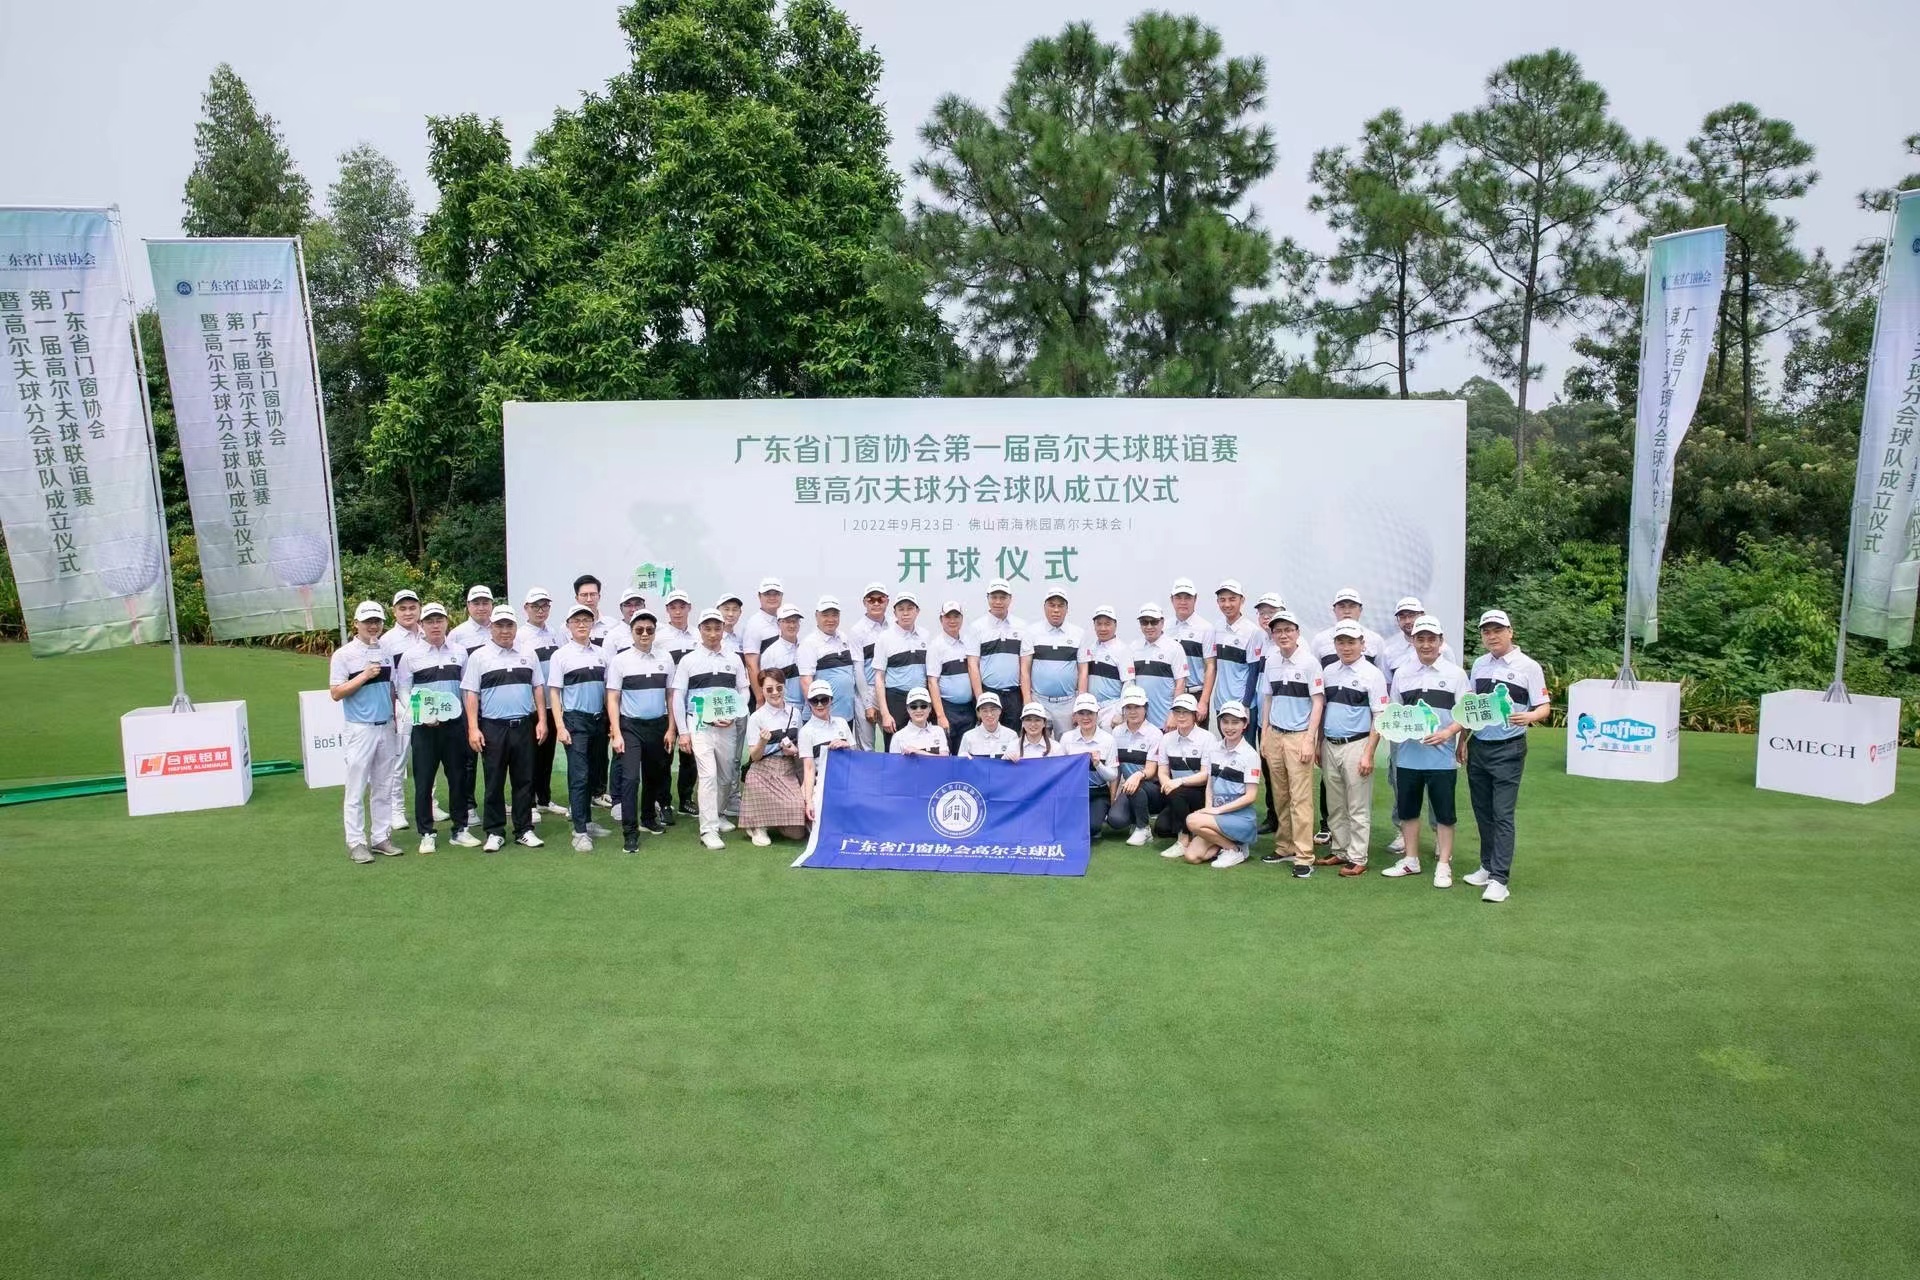 Warm congratulations on | guangdong association of doors and Windows of the first golf friendship tournament and China's doors and Windows industry 】 quality development BBS held successfully